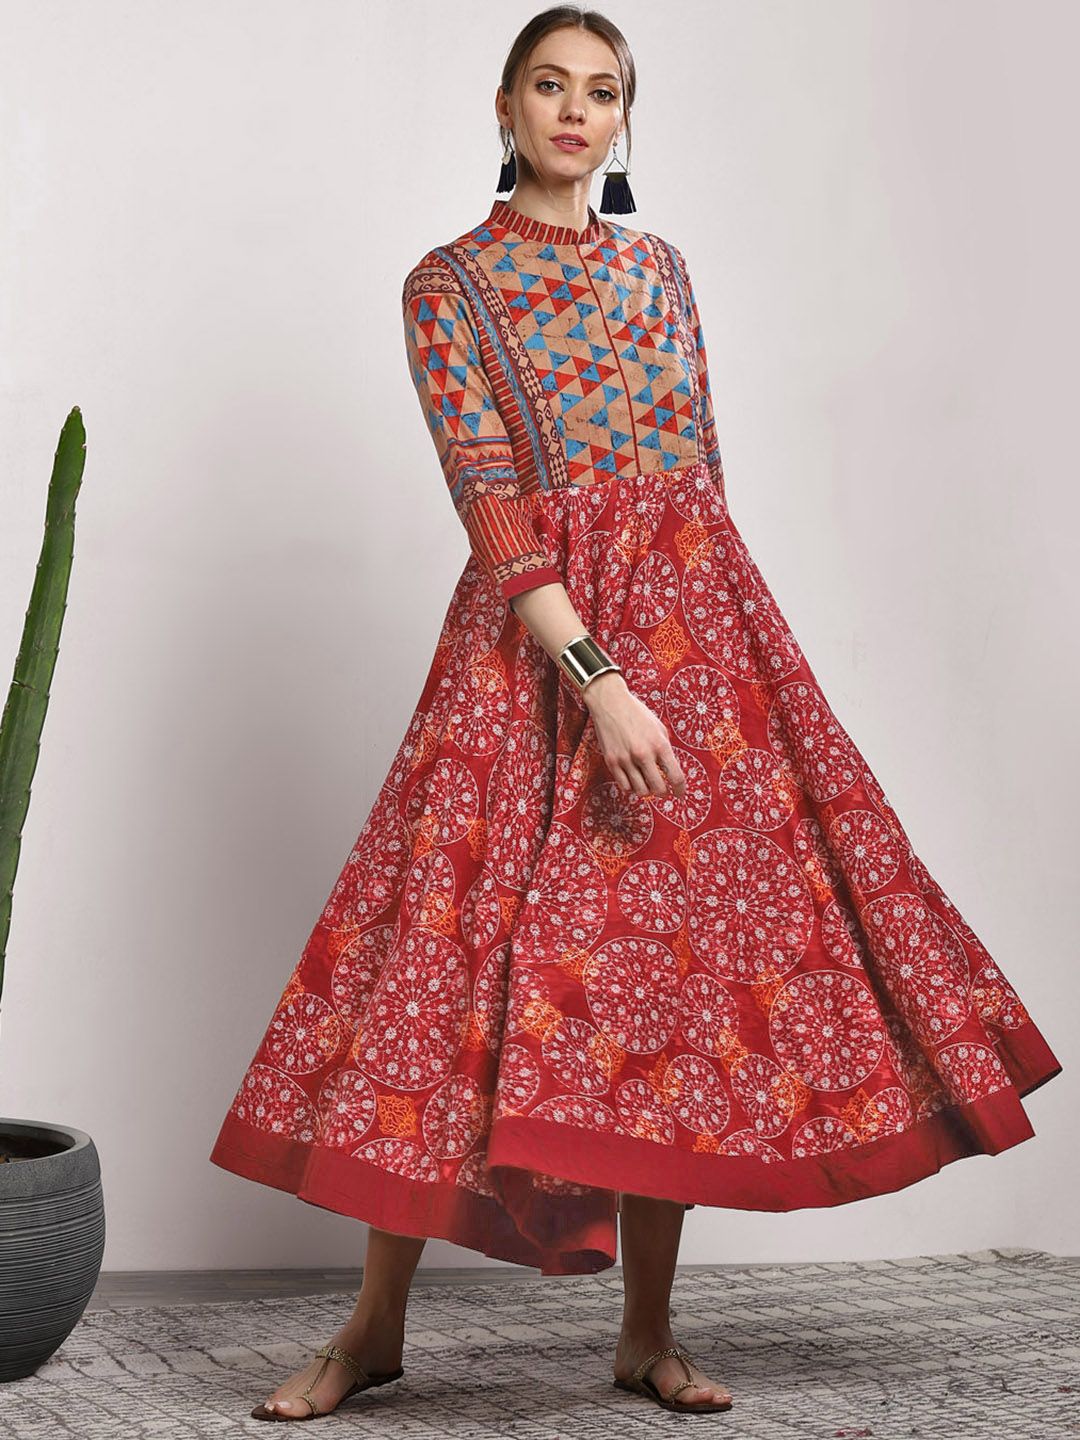 Sangria Multicoloured Ethnic Motifs Printed Cotton A-Line Dress Price in India